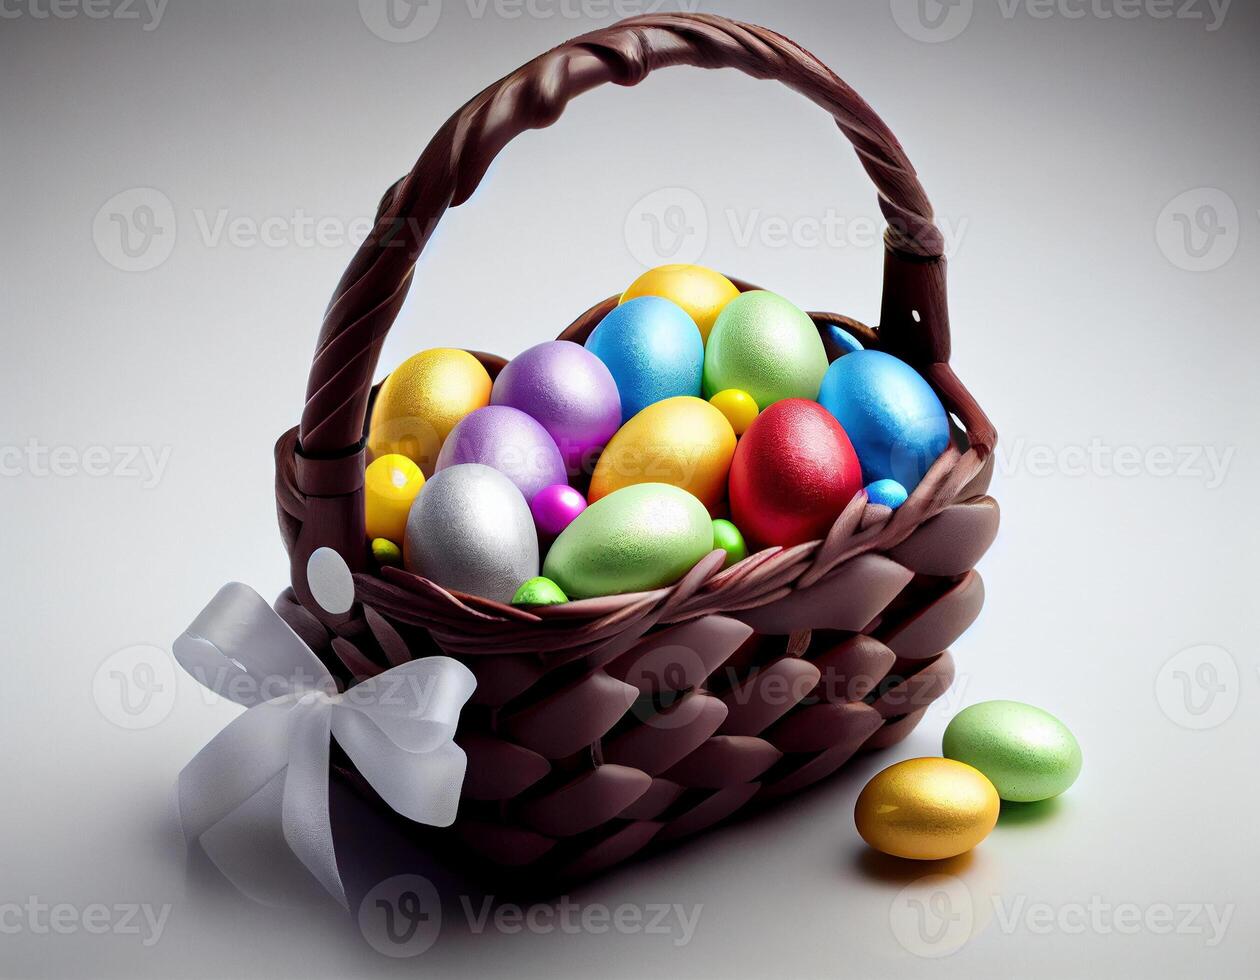 Easter basket full of colorful eggs, created with photo